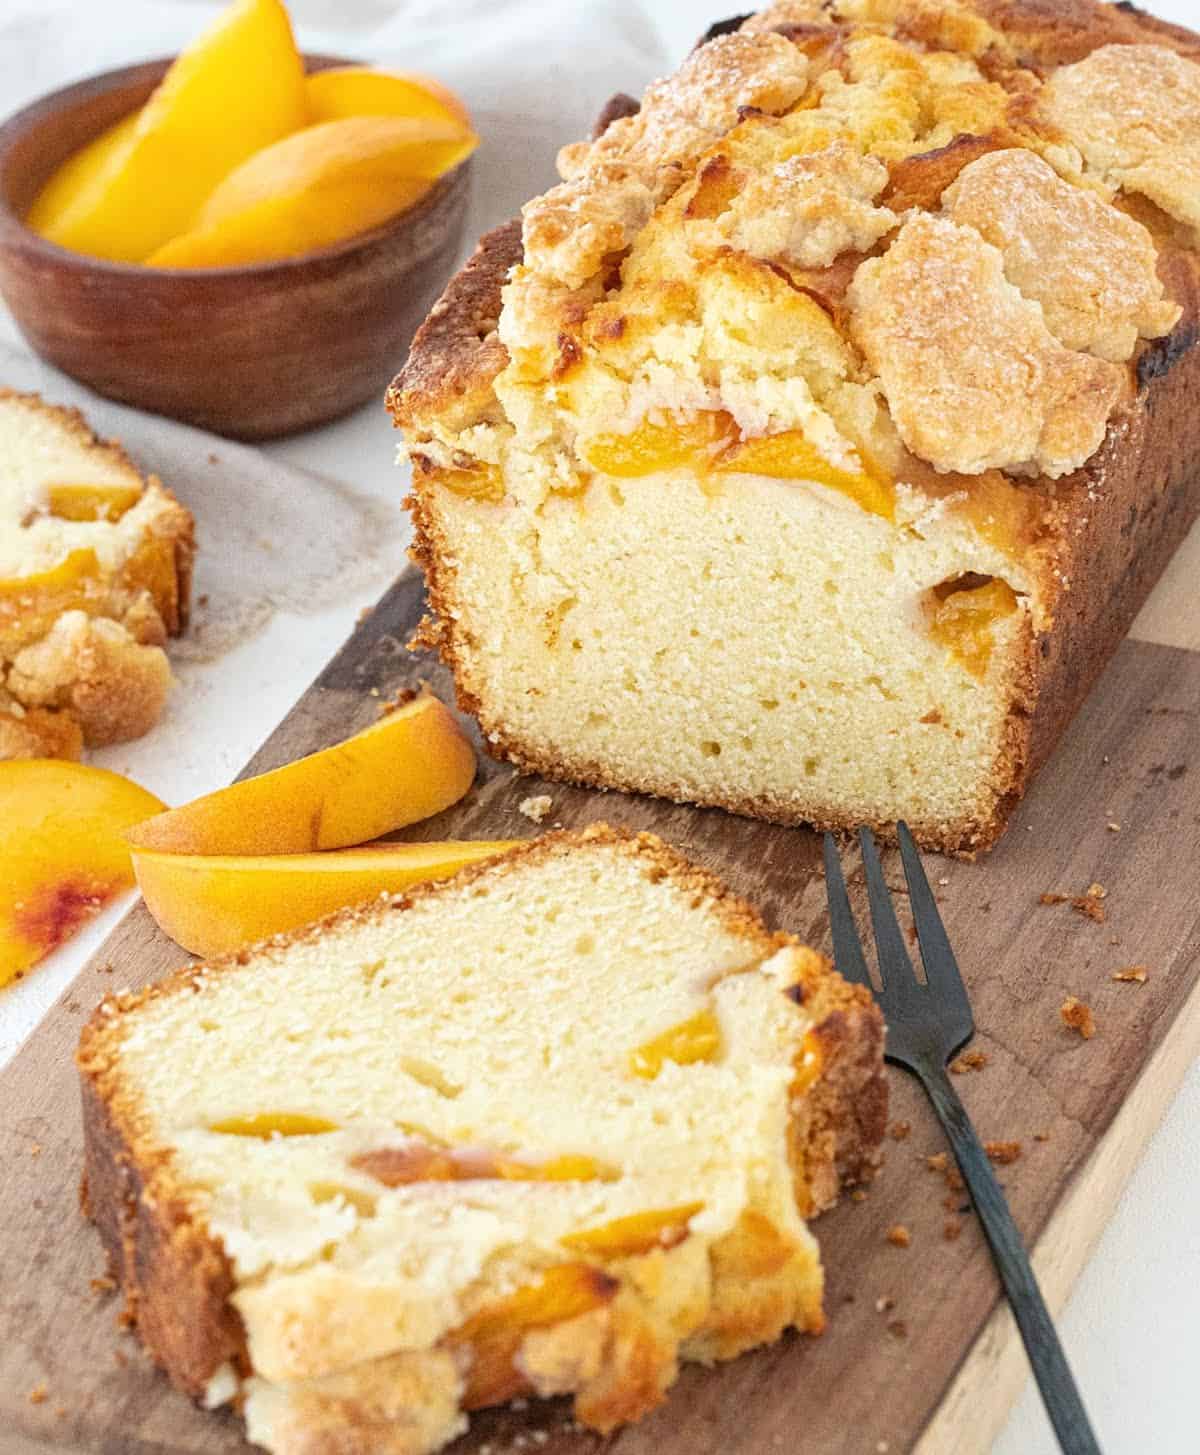 Peach pound cake with a cut slice on a wooden board, small dark fork and peach slices around.